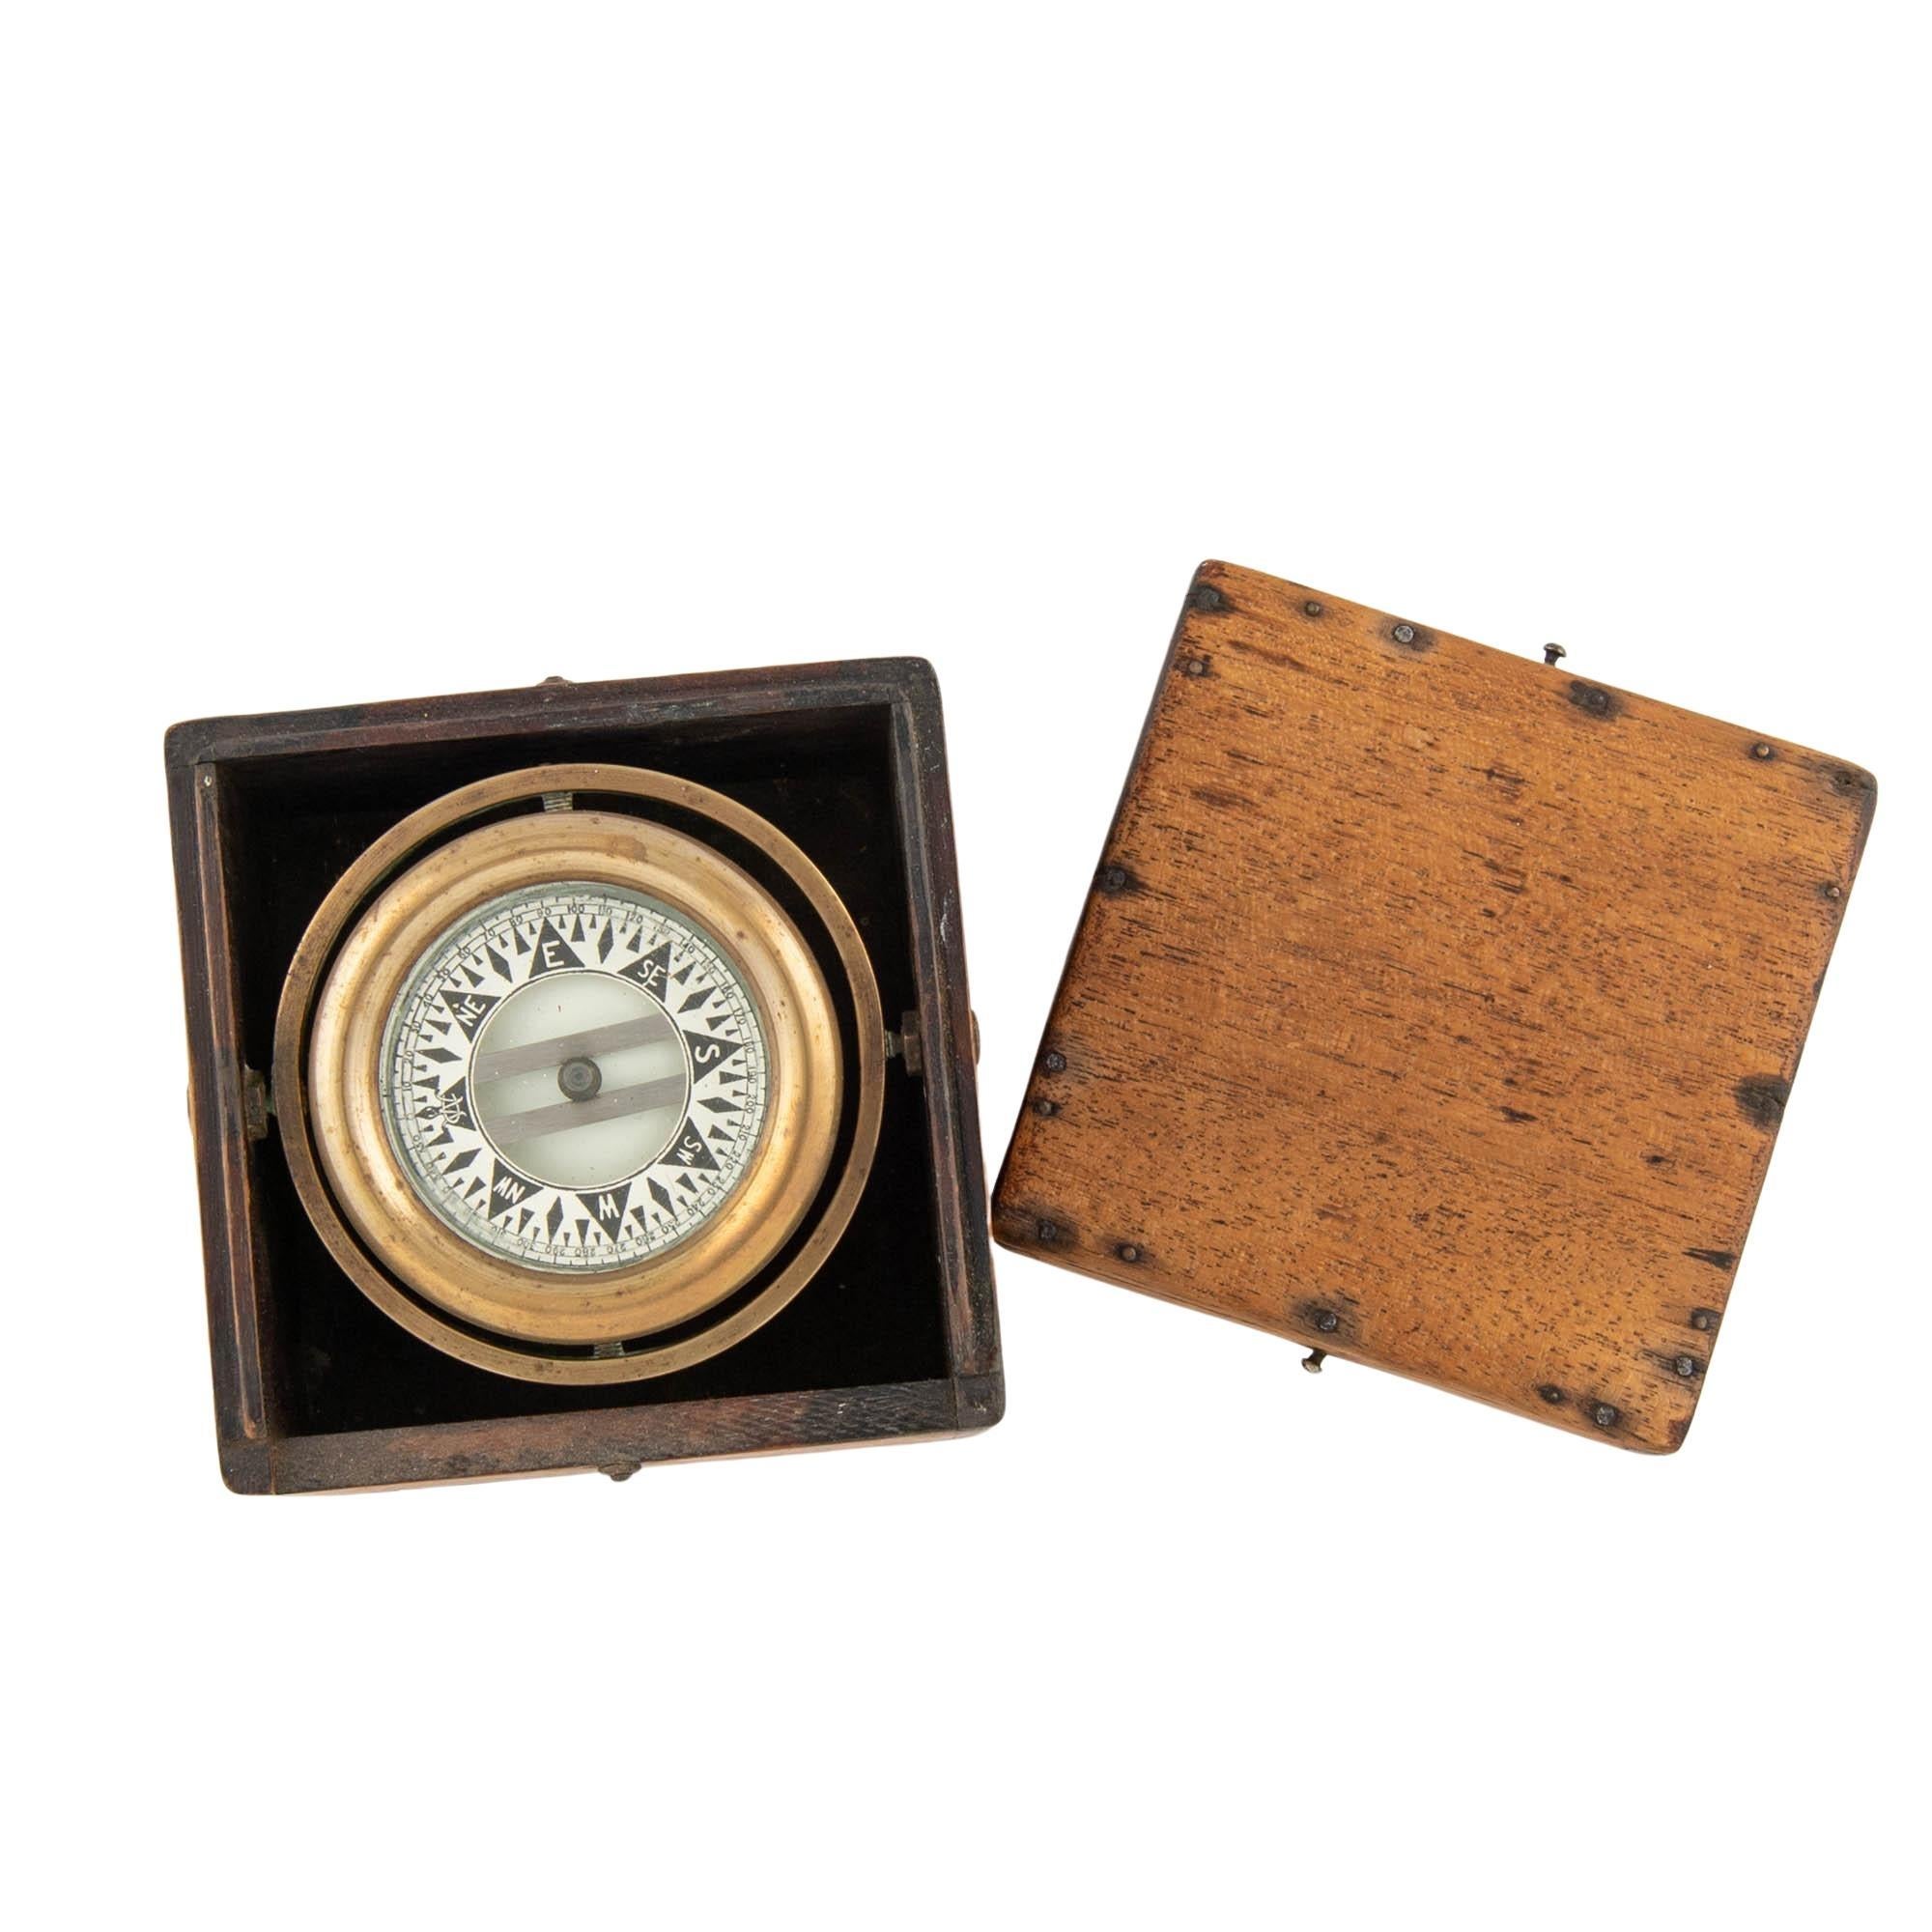 Presented is a Victorian-era gimballed compass by Wilcox, Crittenden & Co. of Middletown, Connecticut. The brass compass is beautifully constructed and fitted in its original wooden lidded box. The compass is mounted on a 360-degree brass gimbal